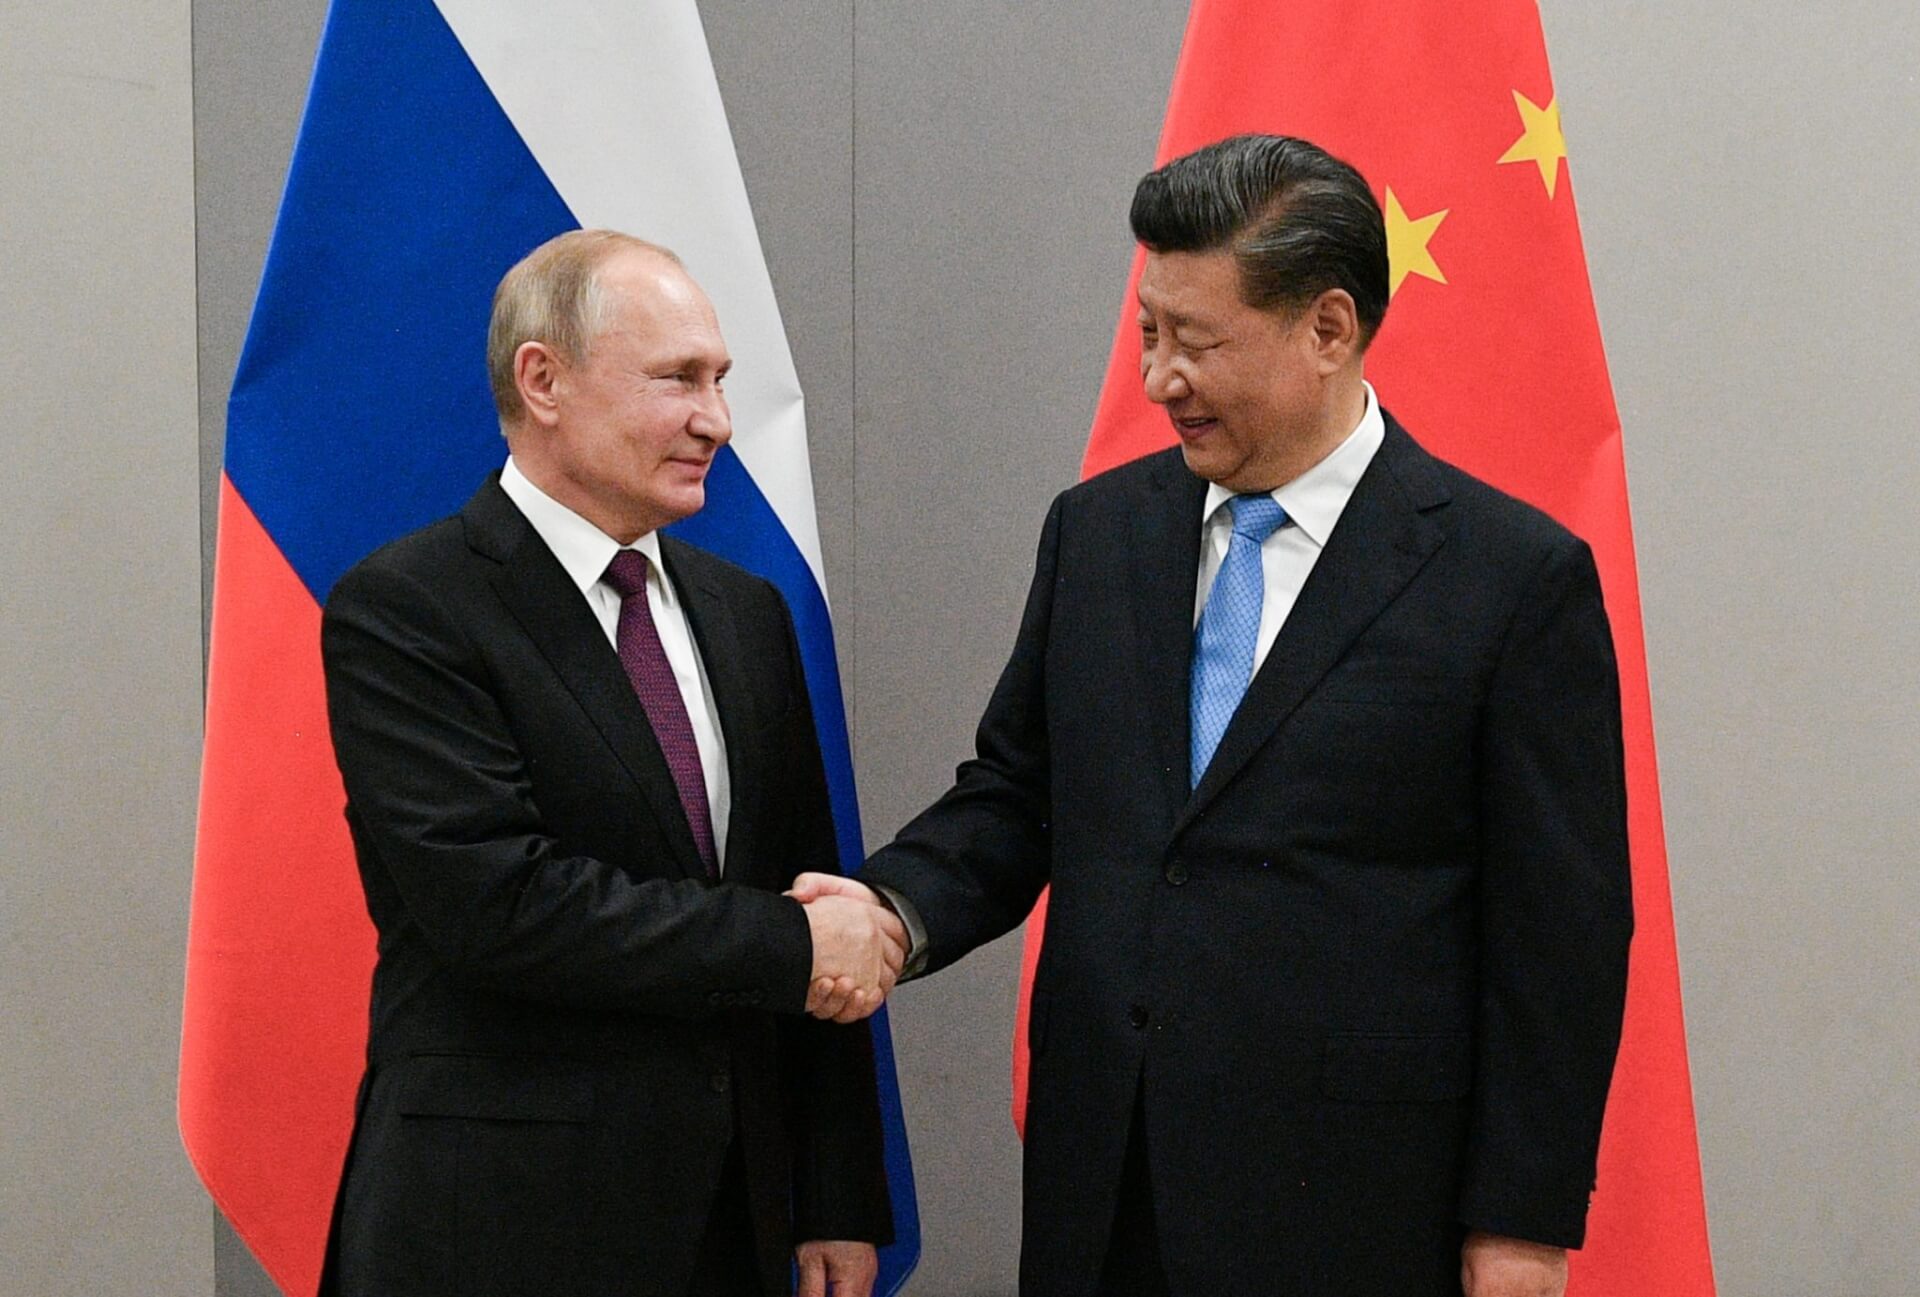 China and Russia To Open Nuclear Energy Project Today